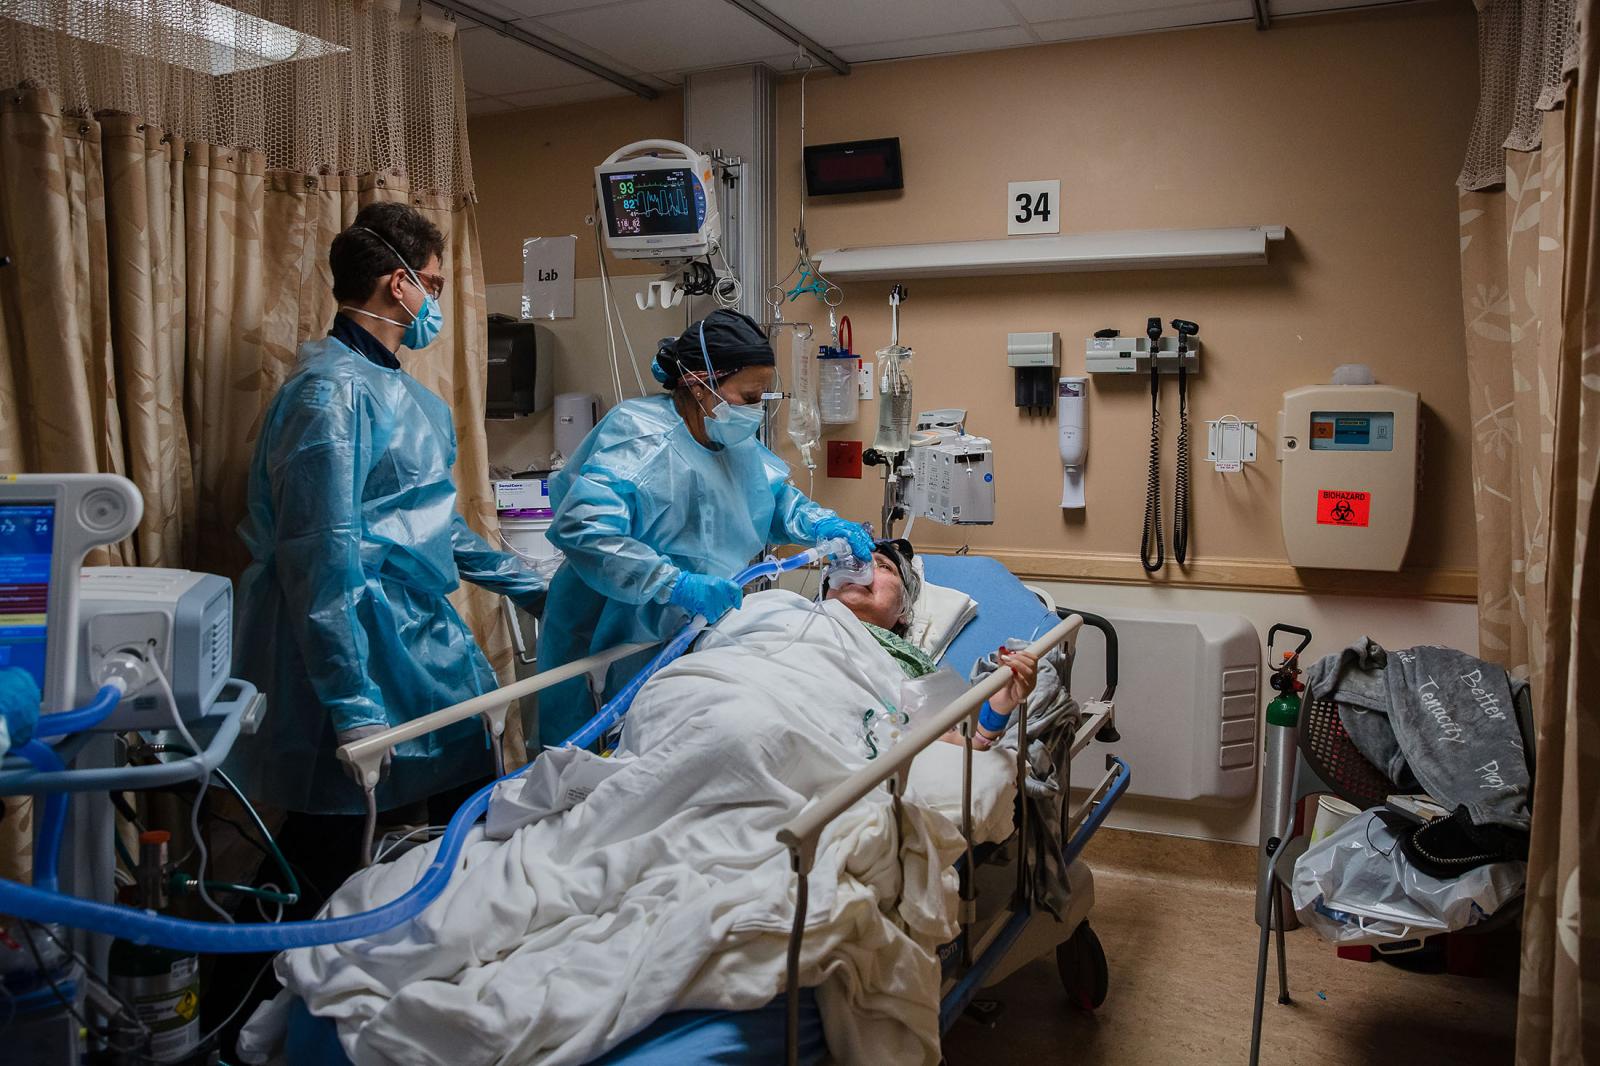 Health Care workers use a continuous positive airway pressure (CPAP) machine on a Covid-19 patient who is having difficulties breathing in a Covid holding pod at Providence St. Mary Medical Center in Apple Valley, California on January 11, 2021.